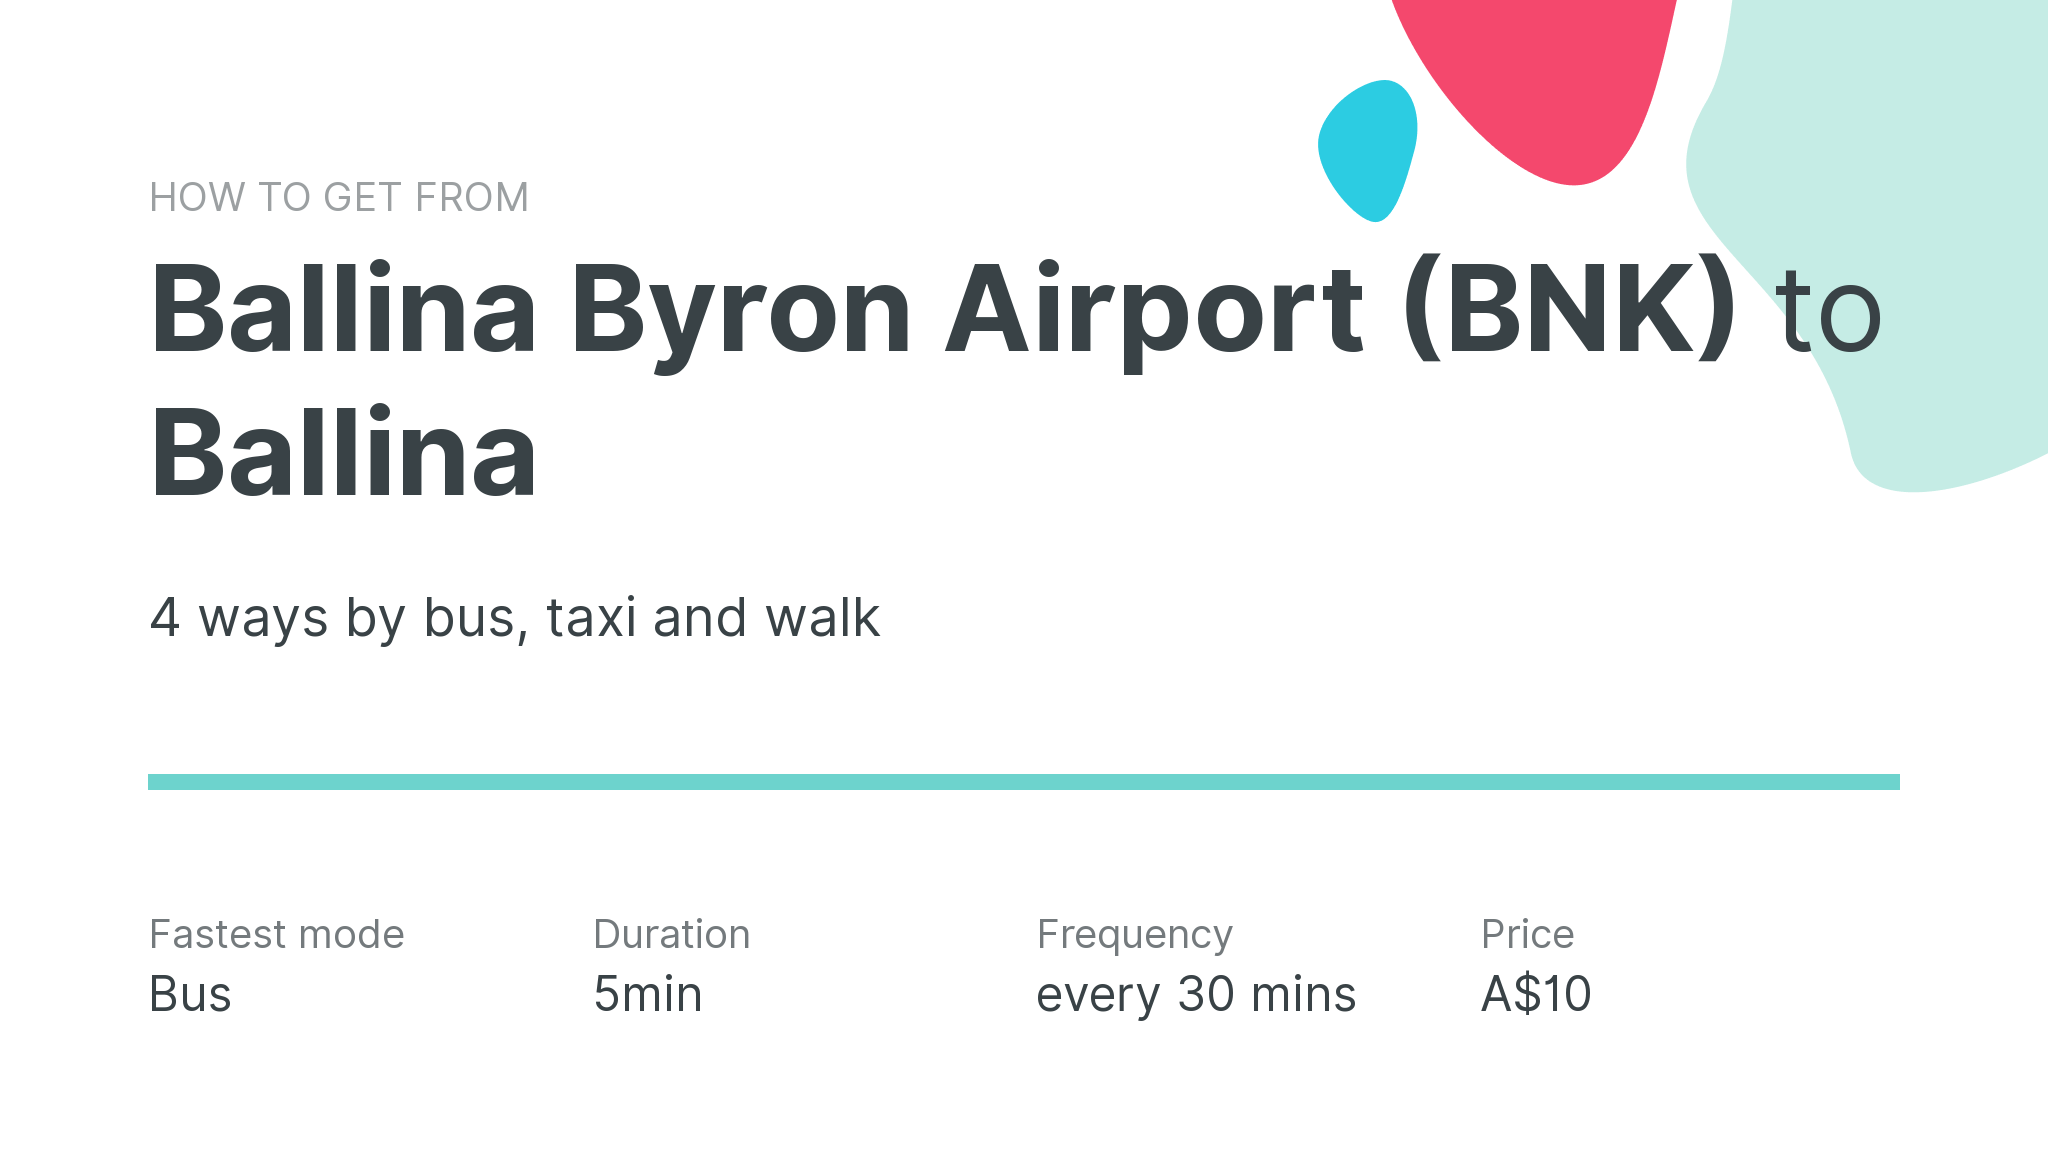 How do I get from Ballina Byron Airport (BNK) to Ballina